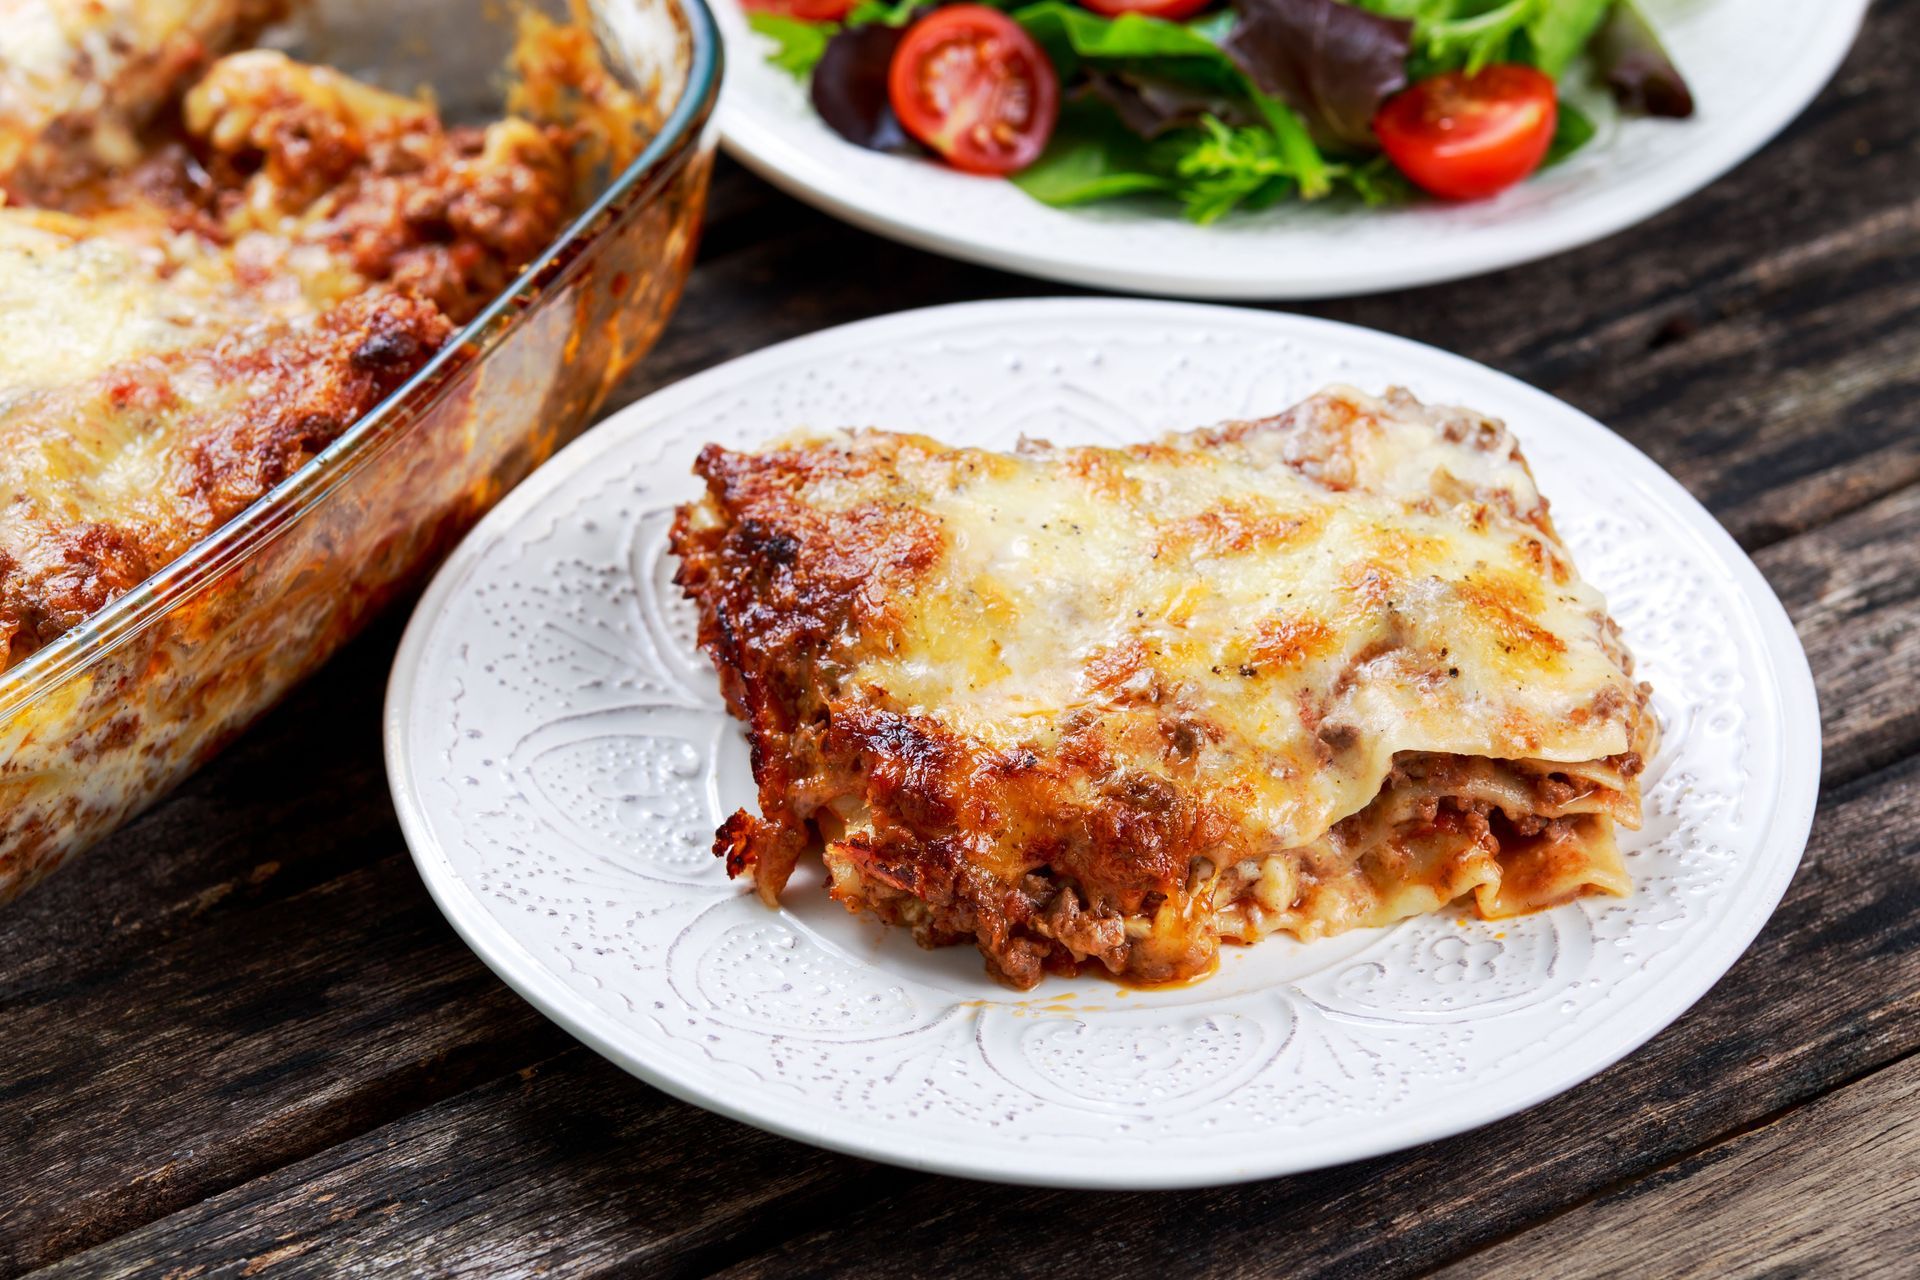 A slice of lasagna is on a white plate on a wooden table.